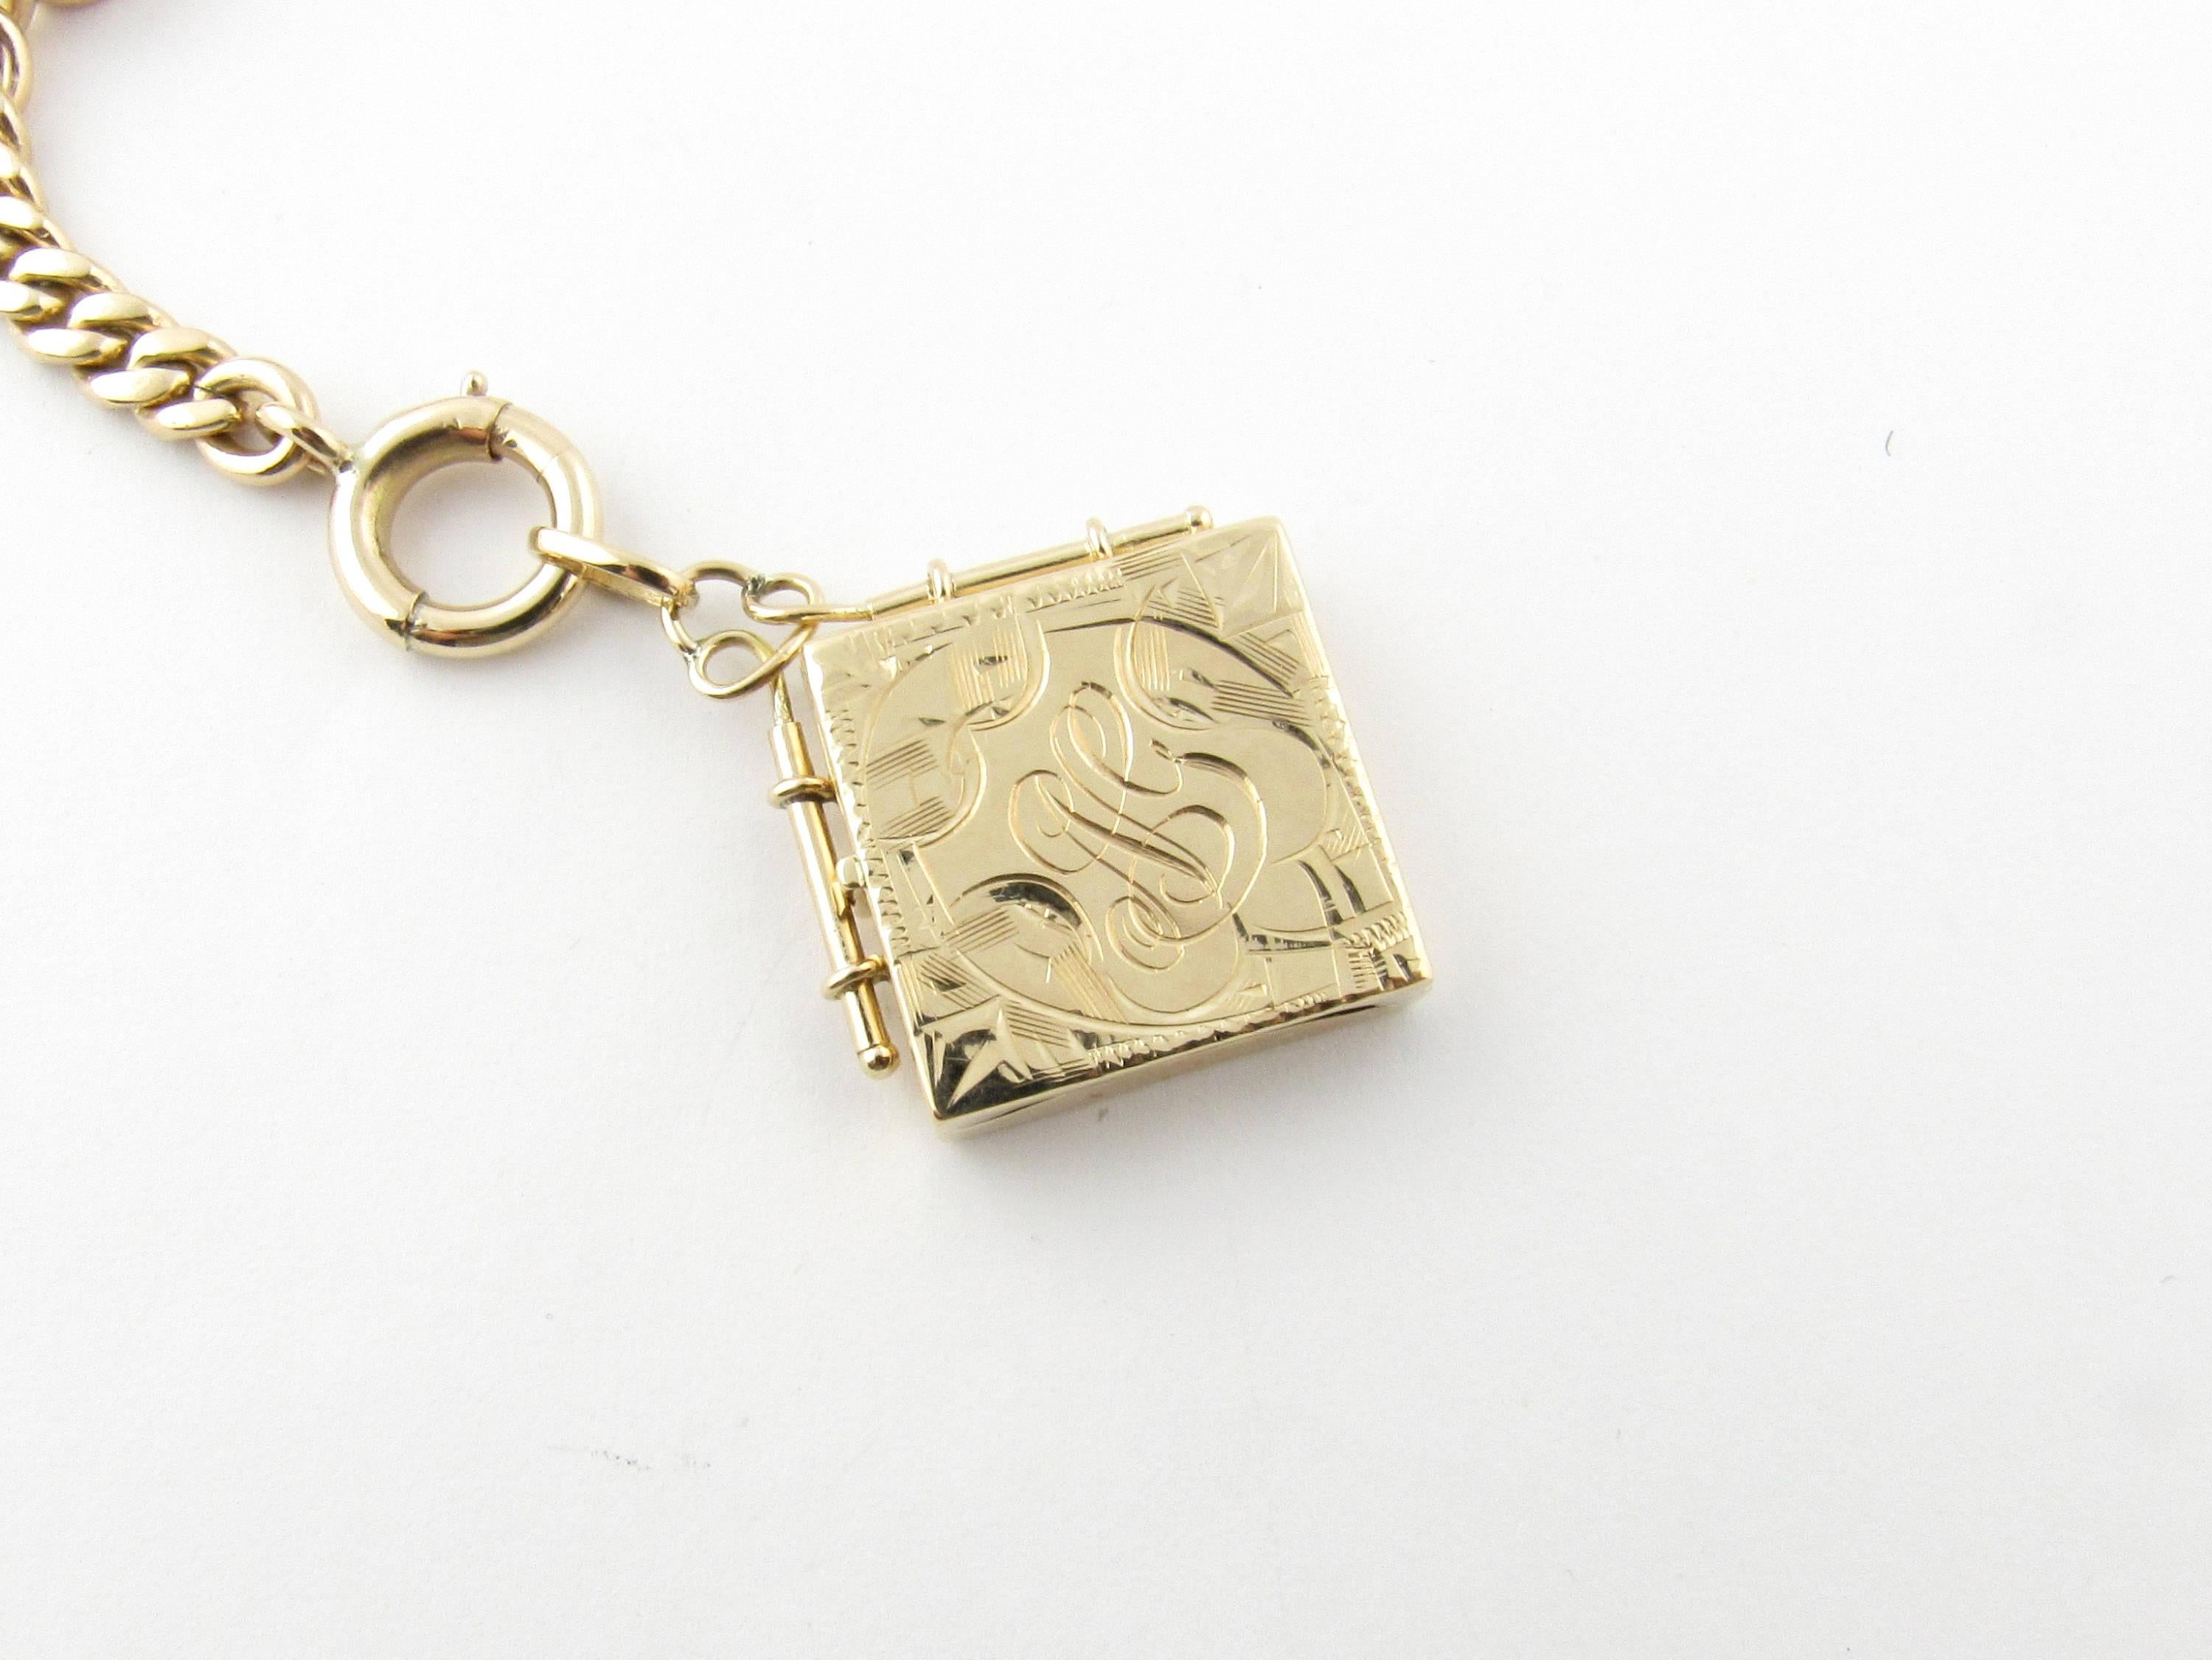 Vintage 14 Karat Yellow Gold Watch Fob Locket

This lovely watch fob features a monogrammed locket (